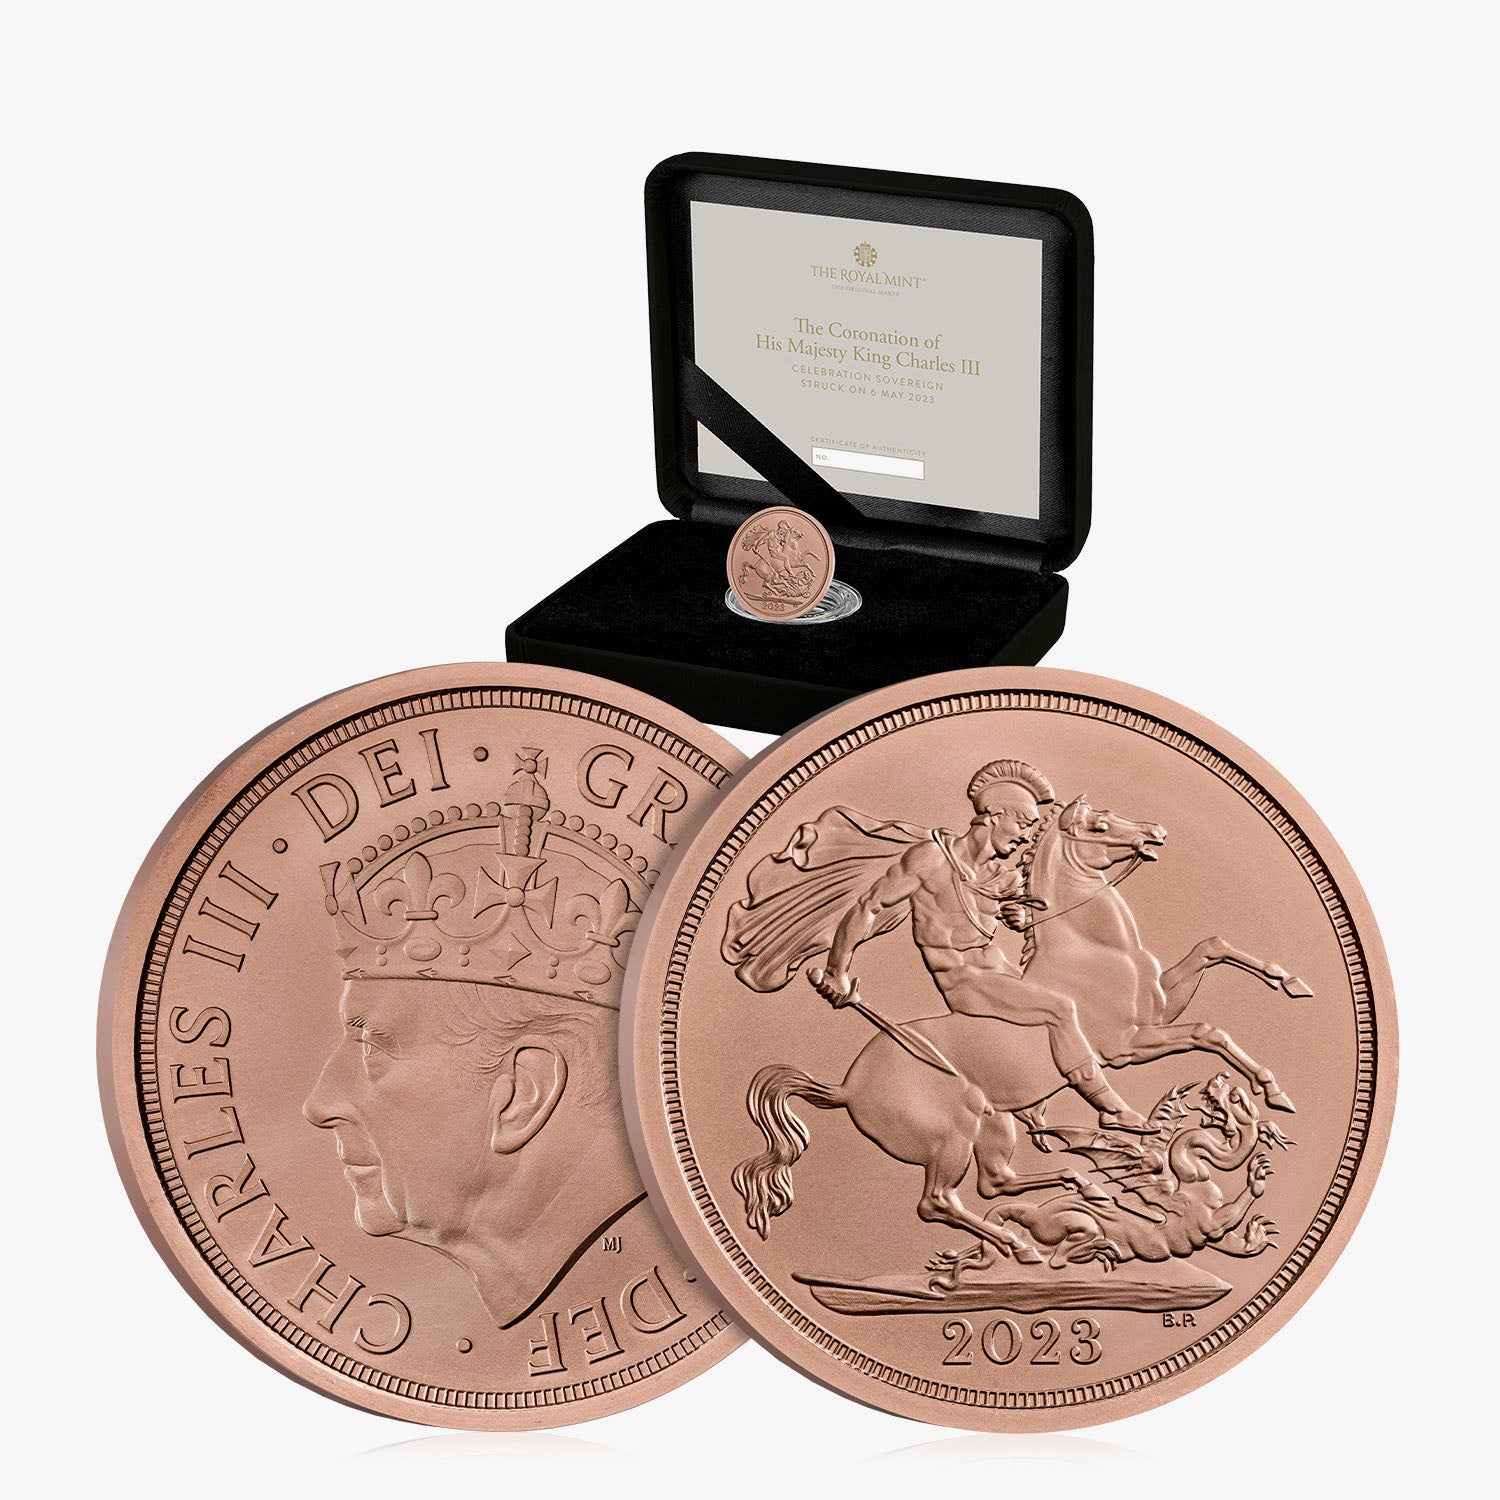 The Coronation of His Majesty King Charles III 2023 Celebration Sovereign Struck on 6 May 2023